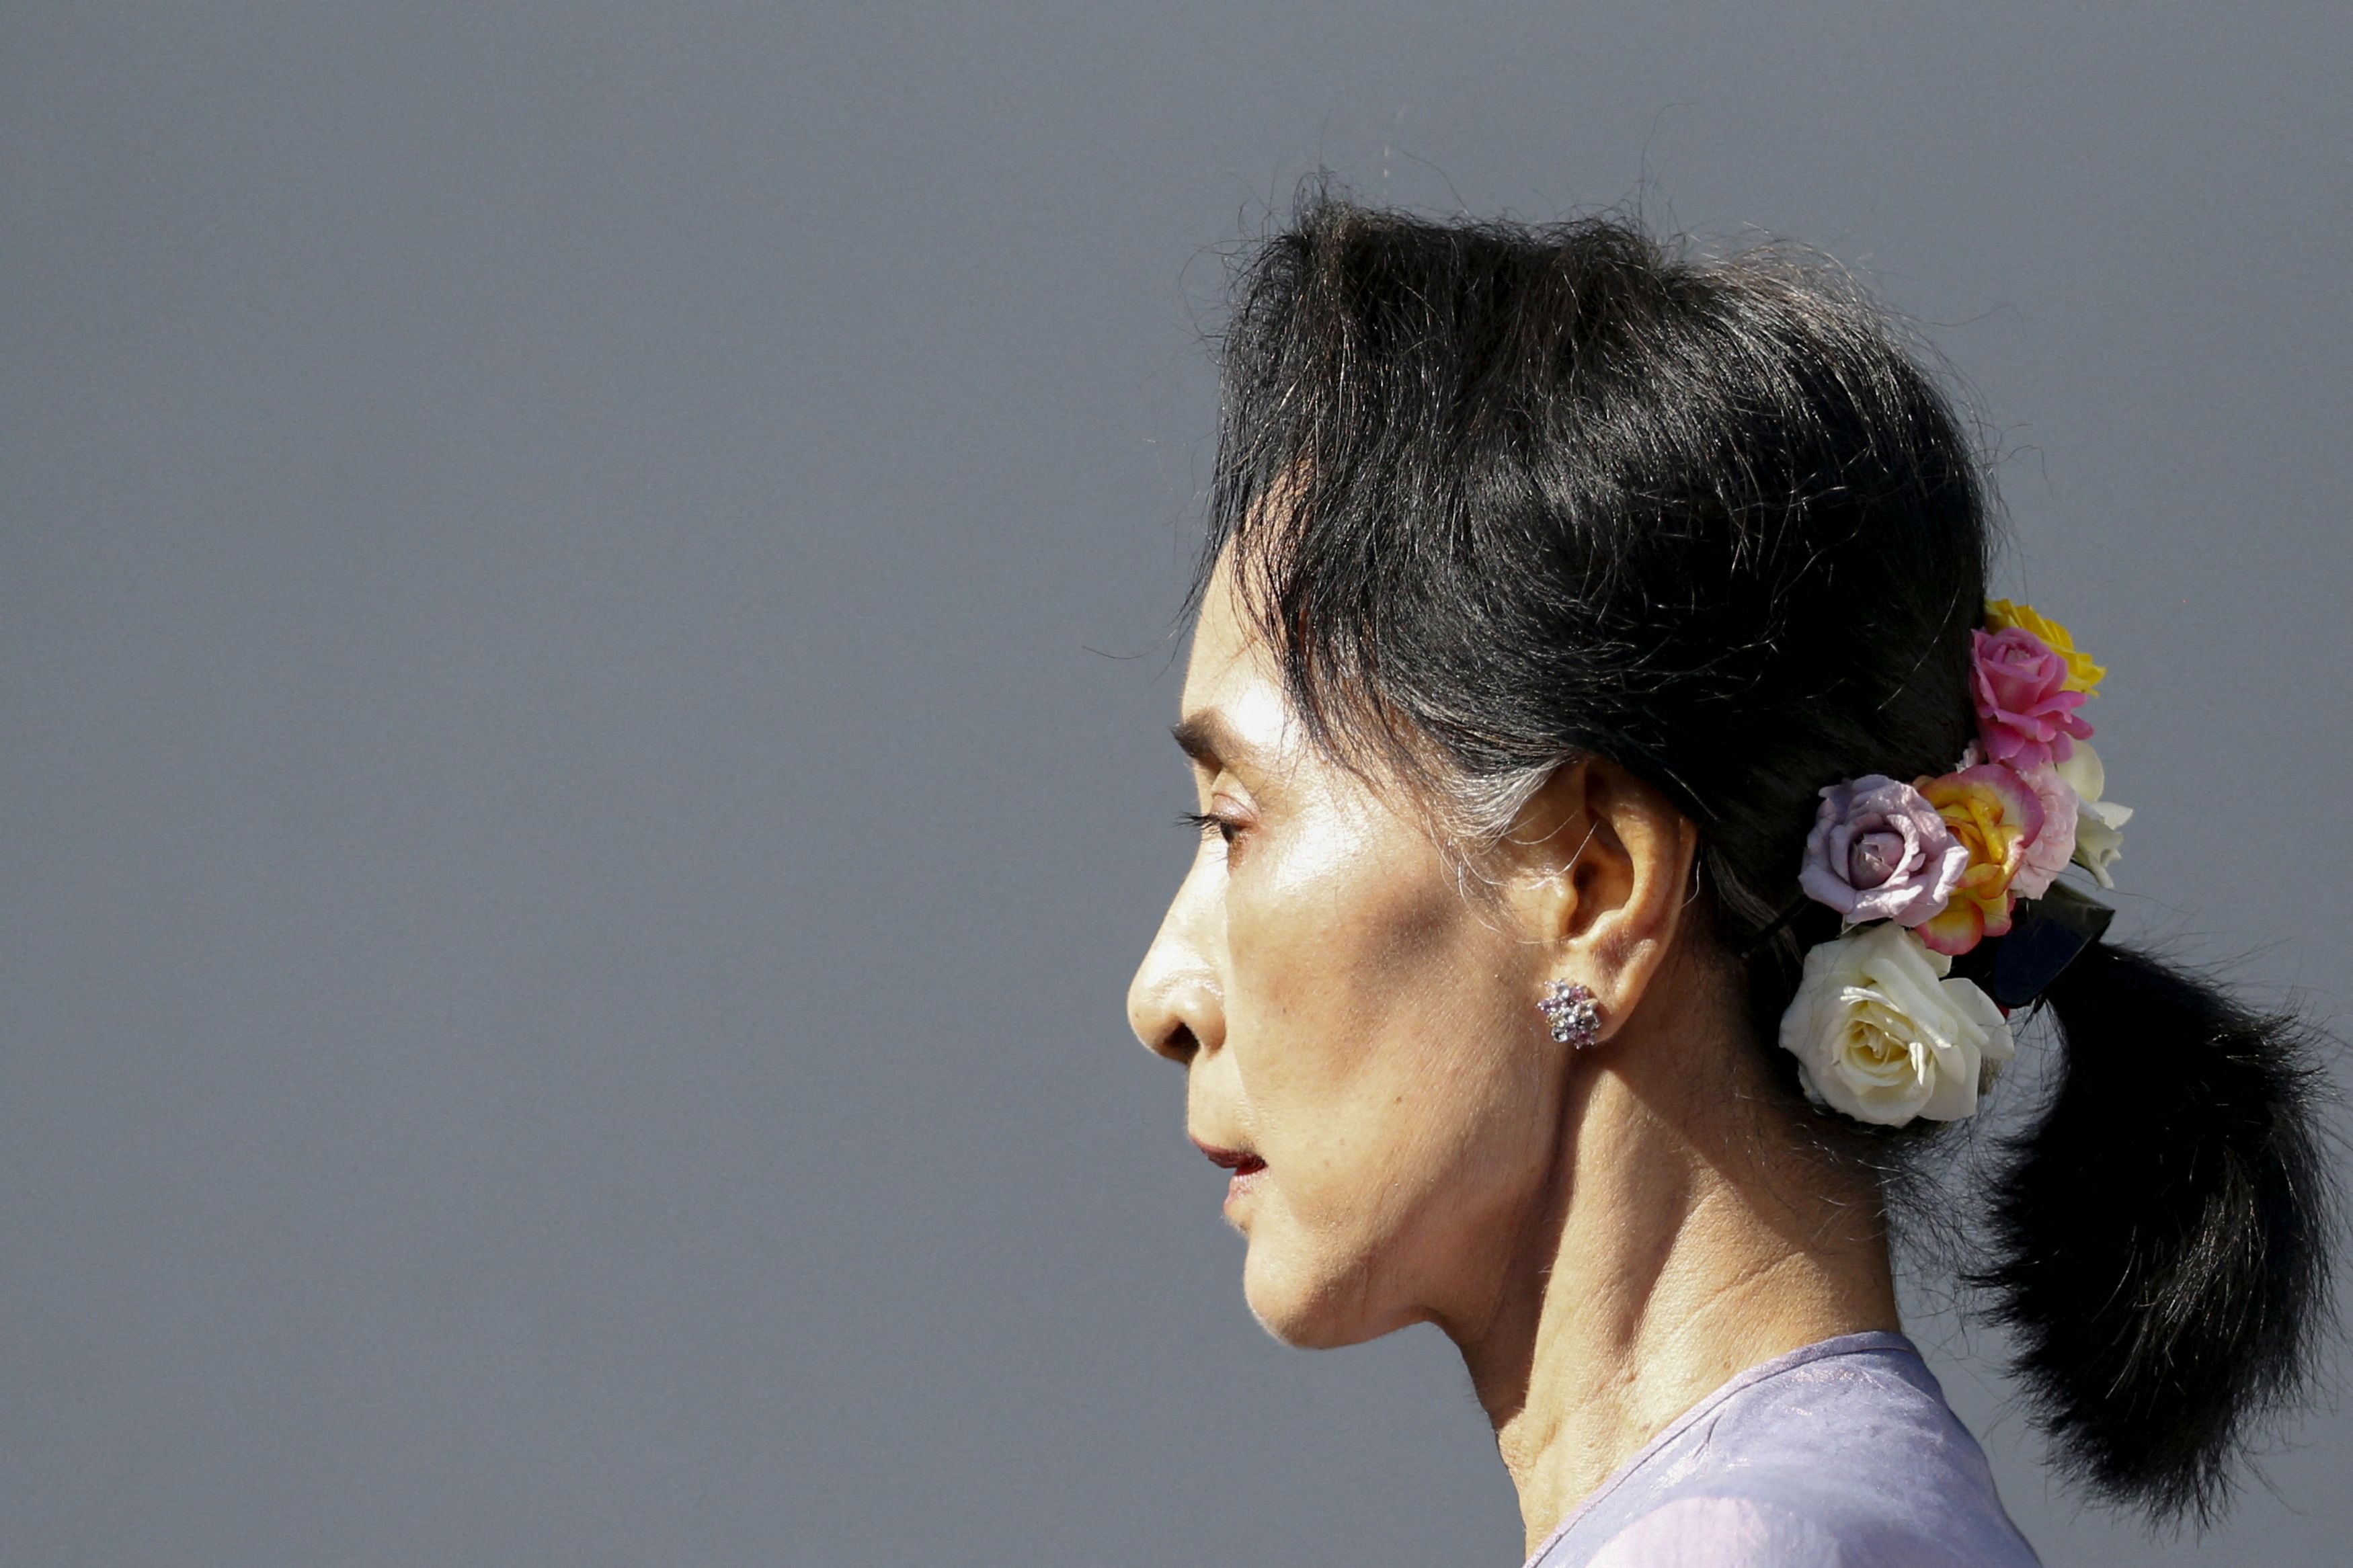 Myanmar's National League for Democracy Party leader Aung San Suu Kyi arrives at a news conference at her home in Yangon